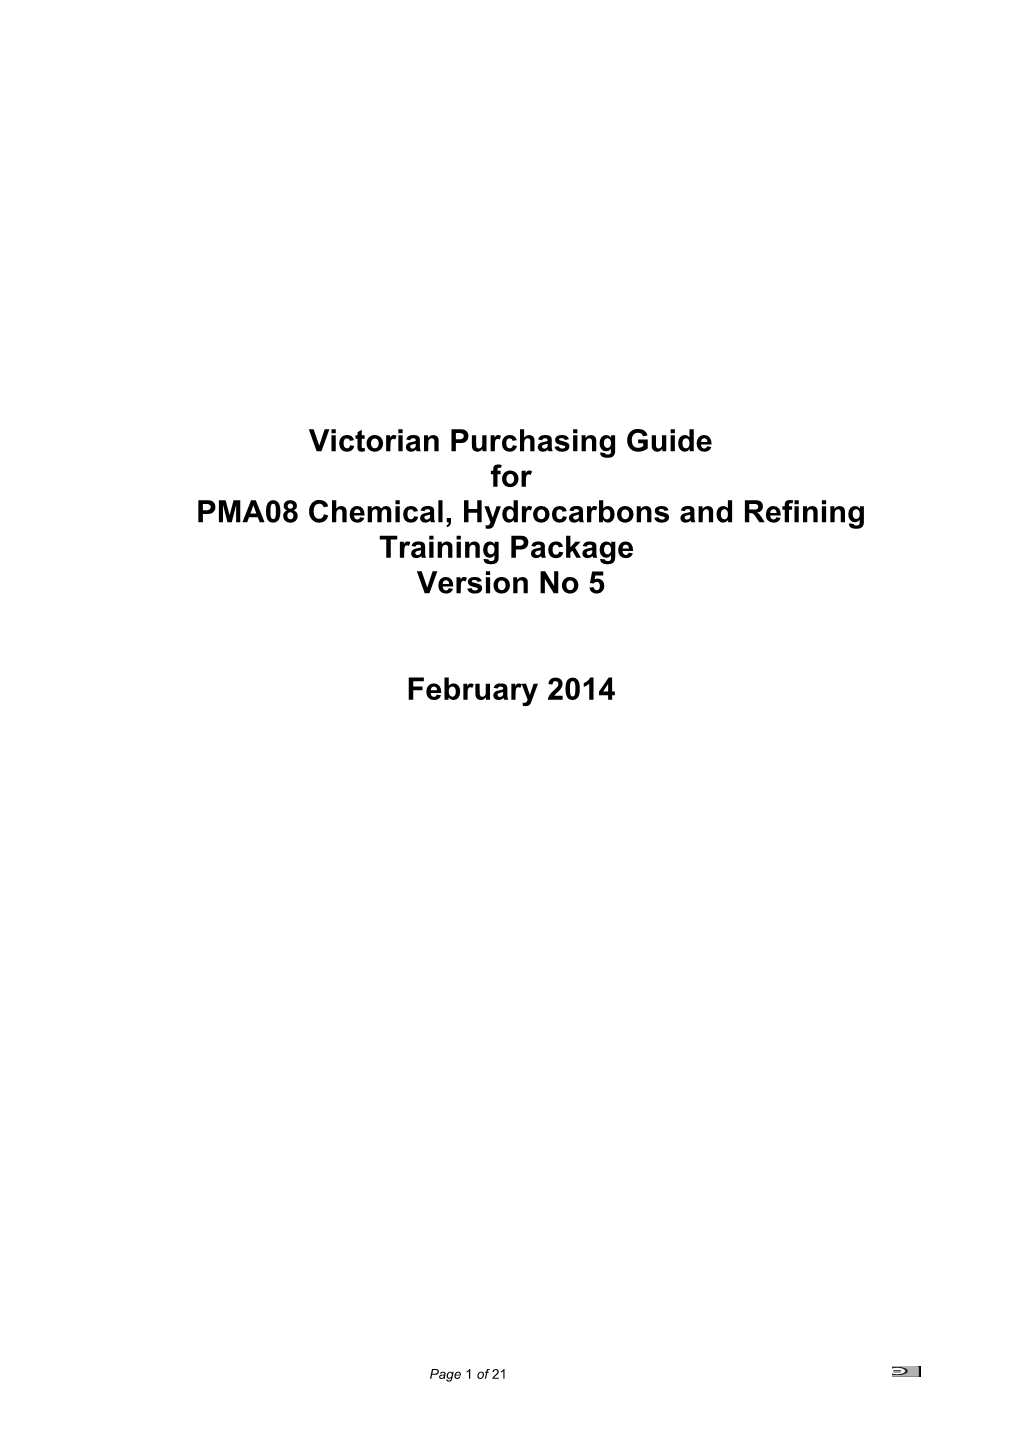 Victorian Purchasing Guide for PMA08 Chemicals, Hydrocarbons and Refining Version 5